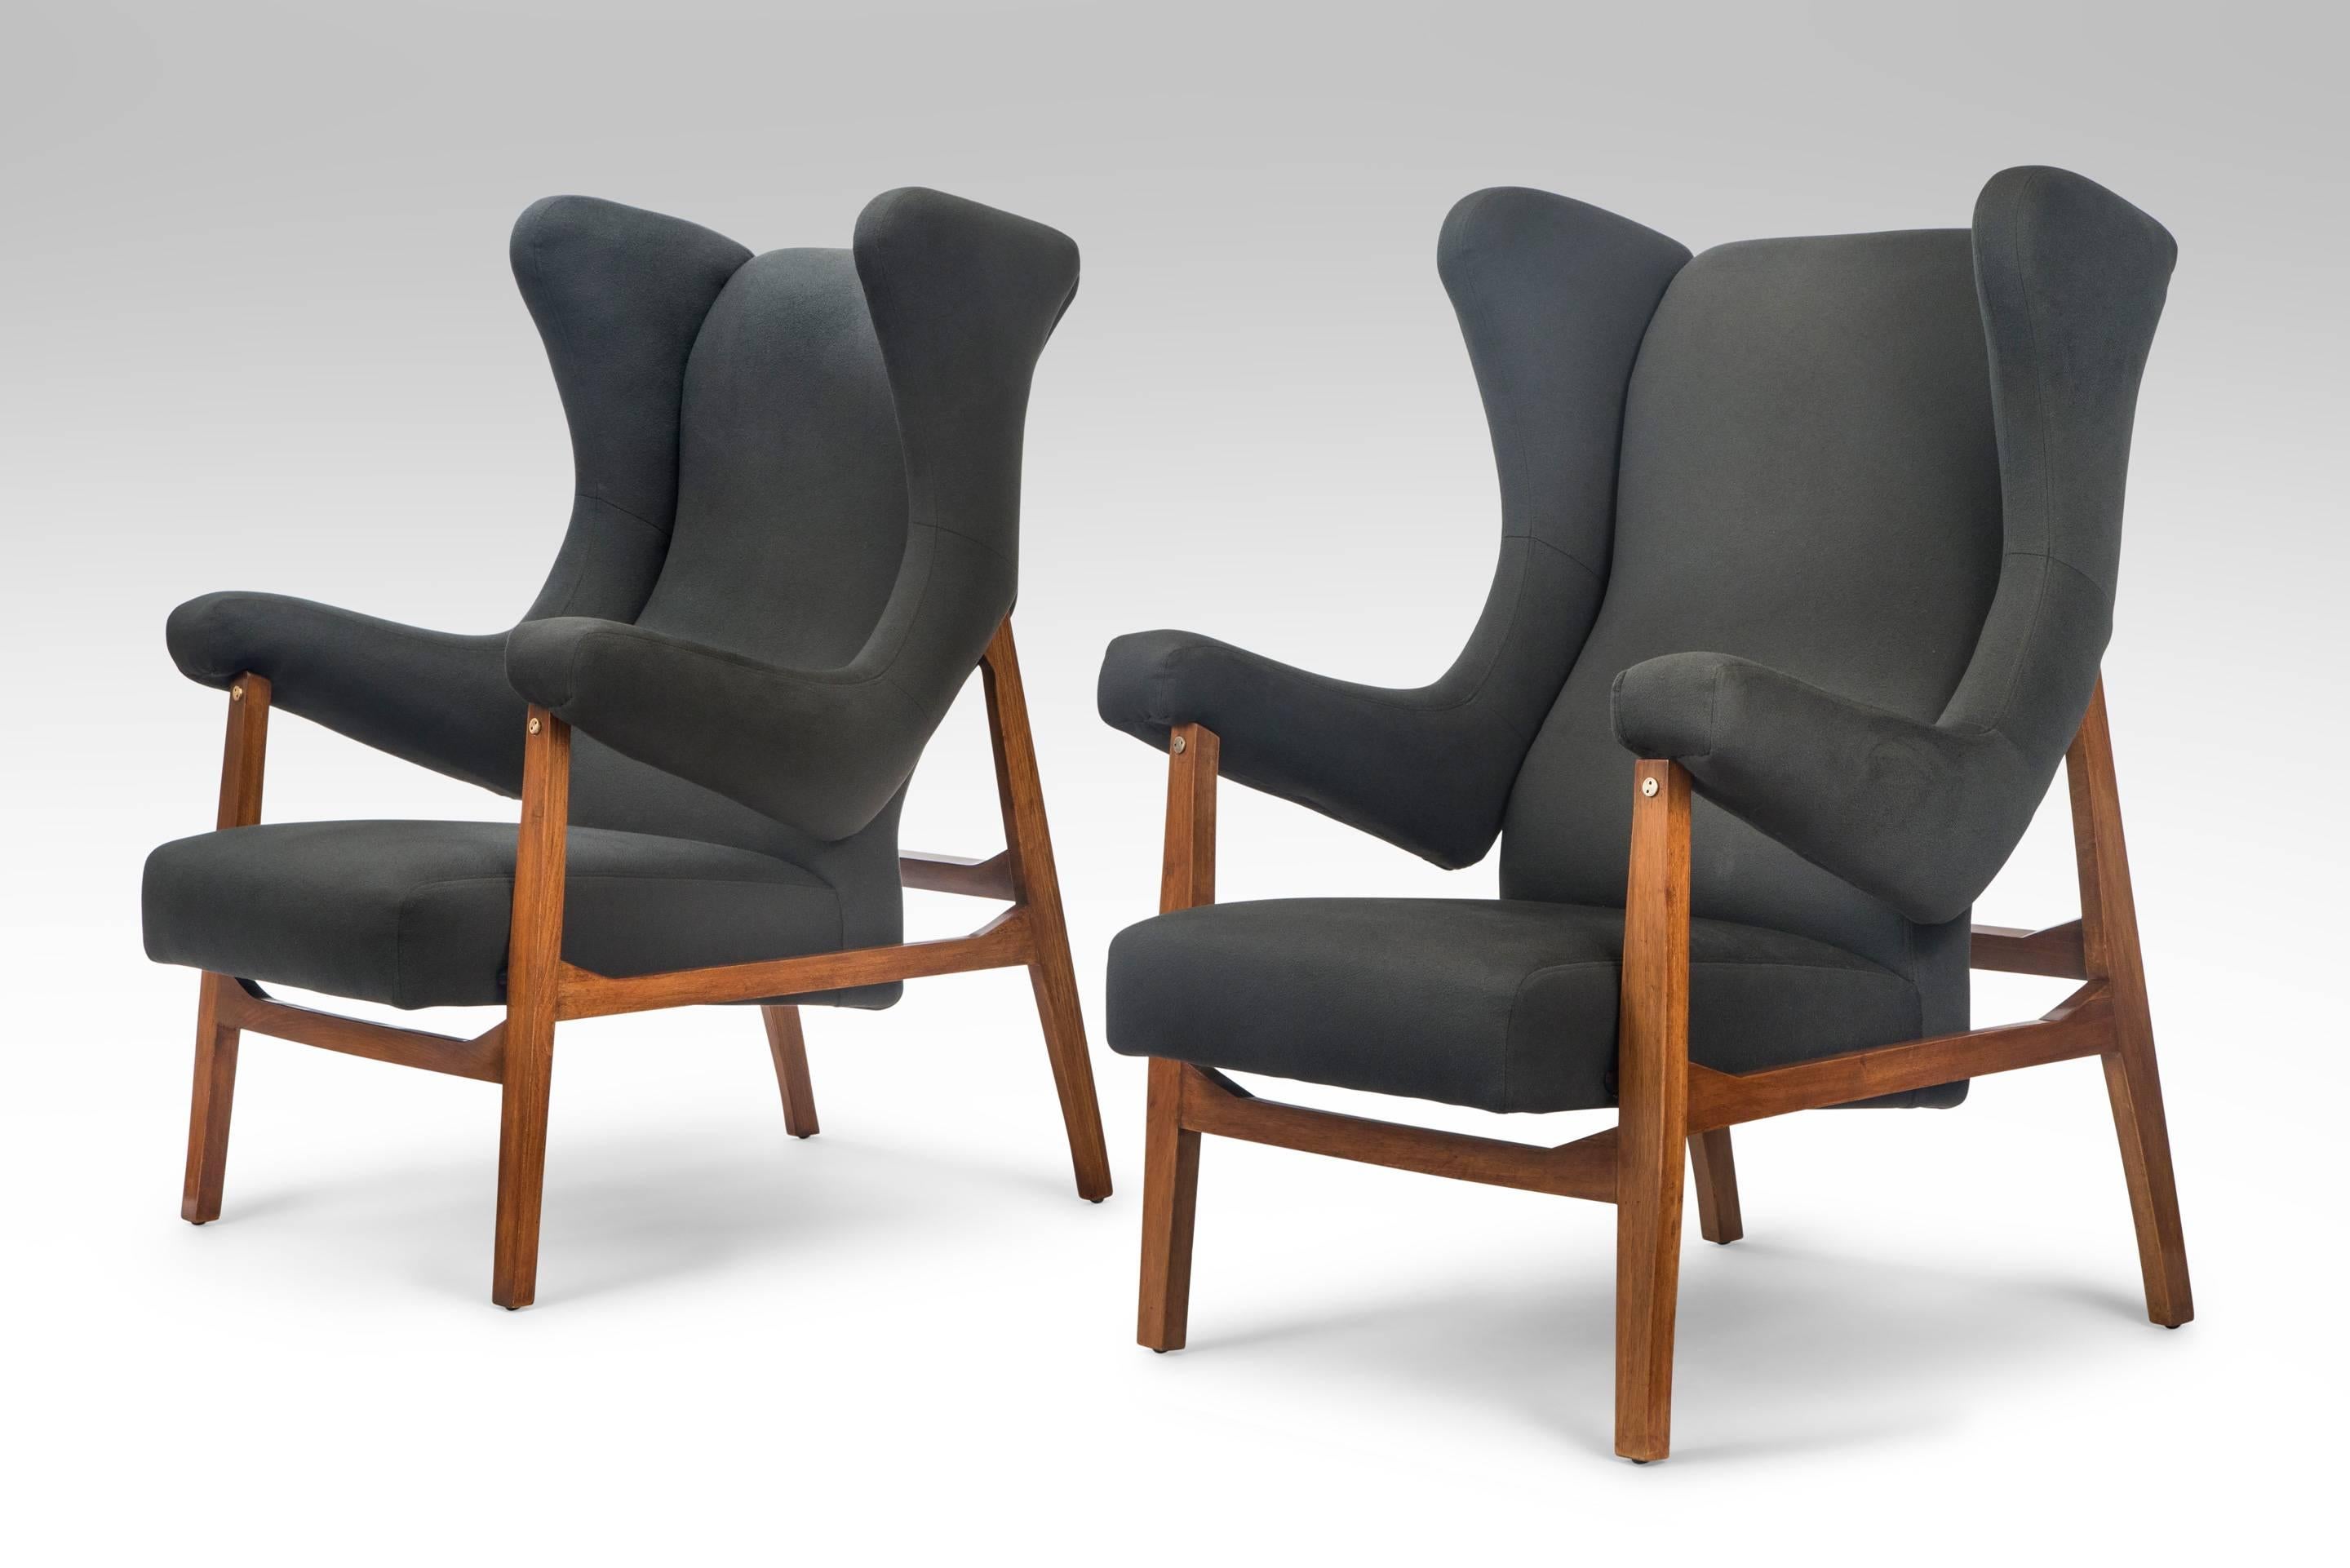 Franco Albini, Pair of Rare Italian Fiorenza Upholstered Armchairs in Loro Piana cashmere fabric, Mid 20th Century
This rare and striking variation of the Fiorenza chair produced in limited quantities for a very brief period.  Extremely comfortable.